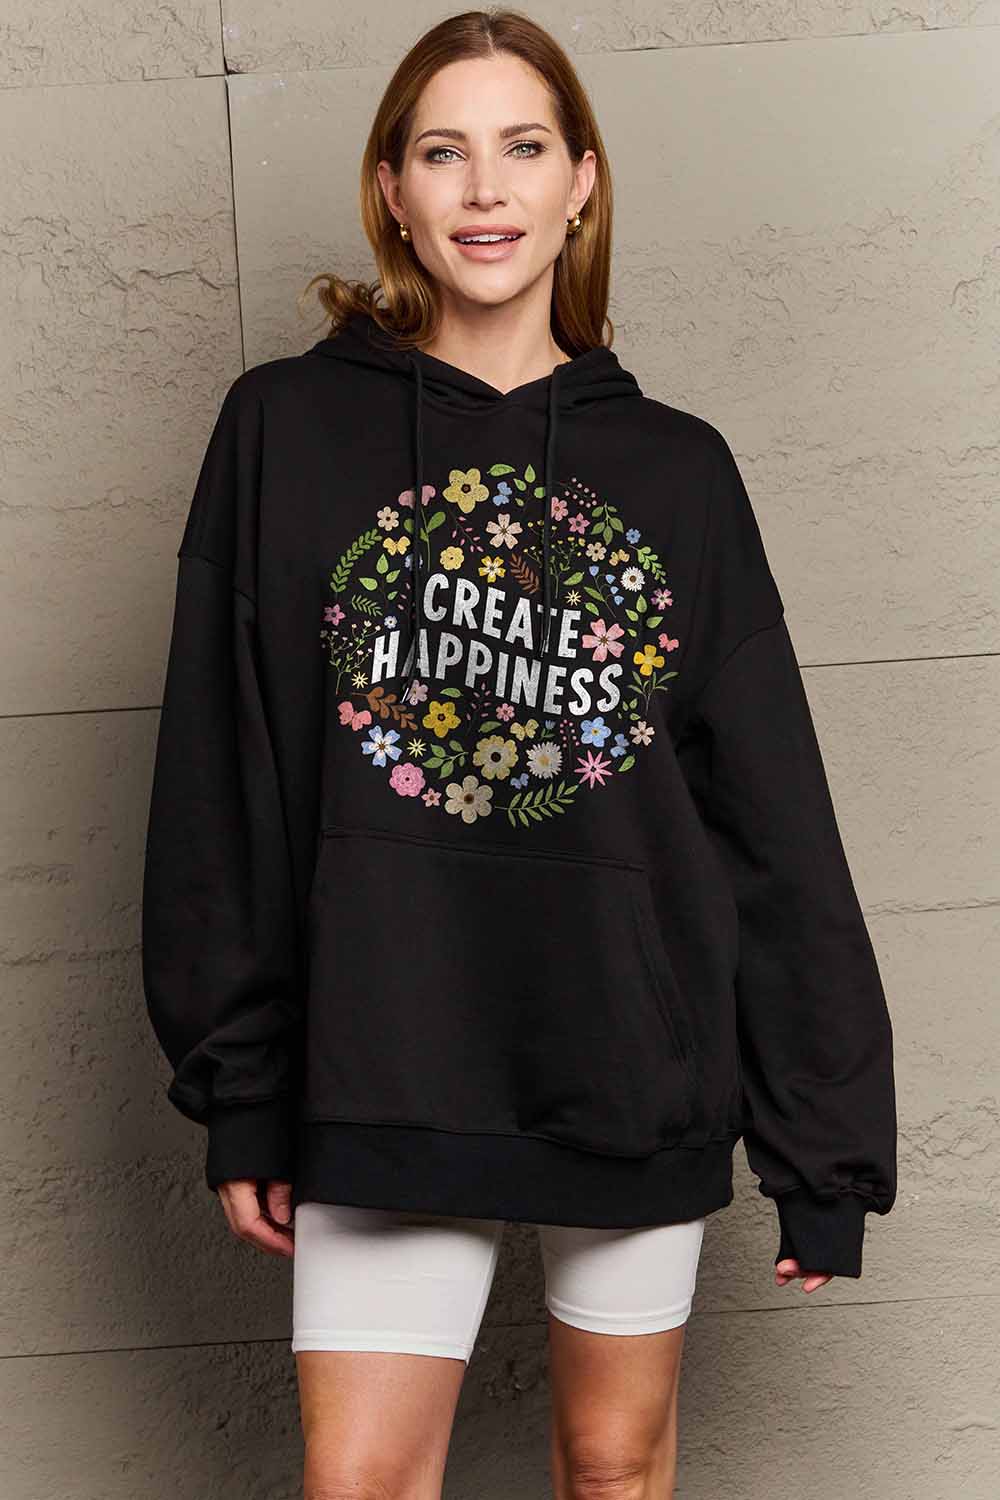 CREATE HAPPINESS Graphic Hoodie